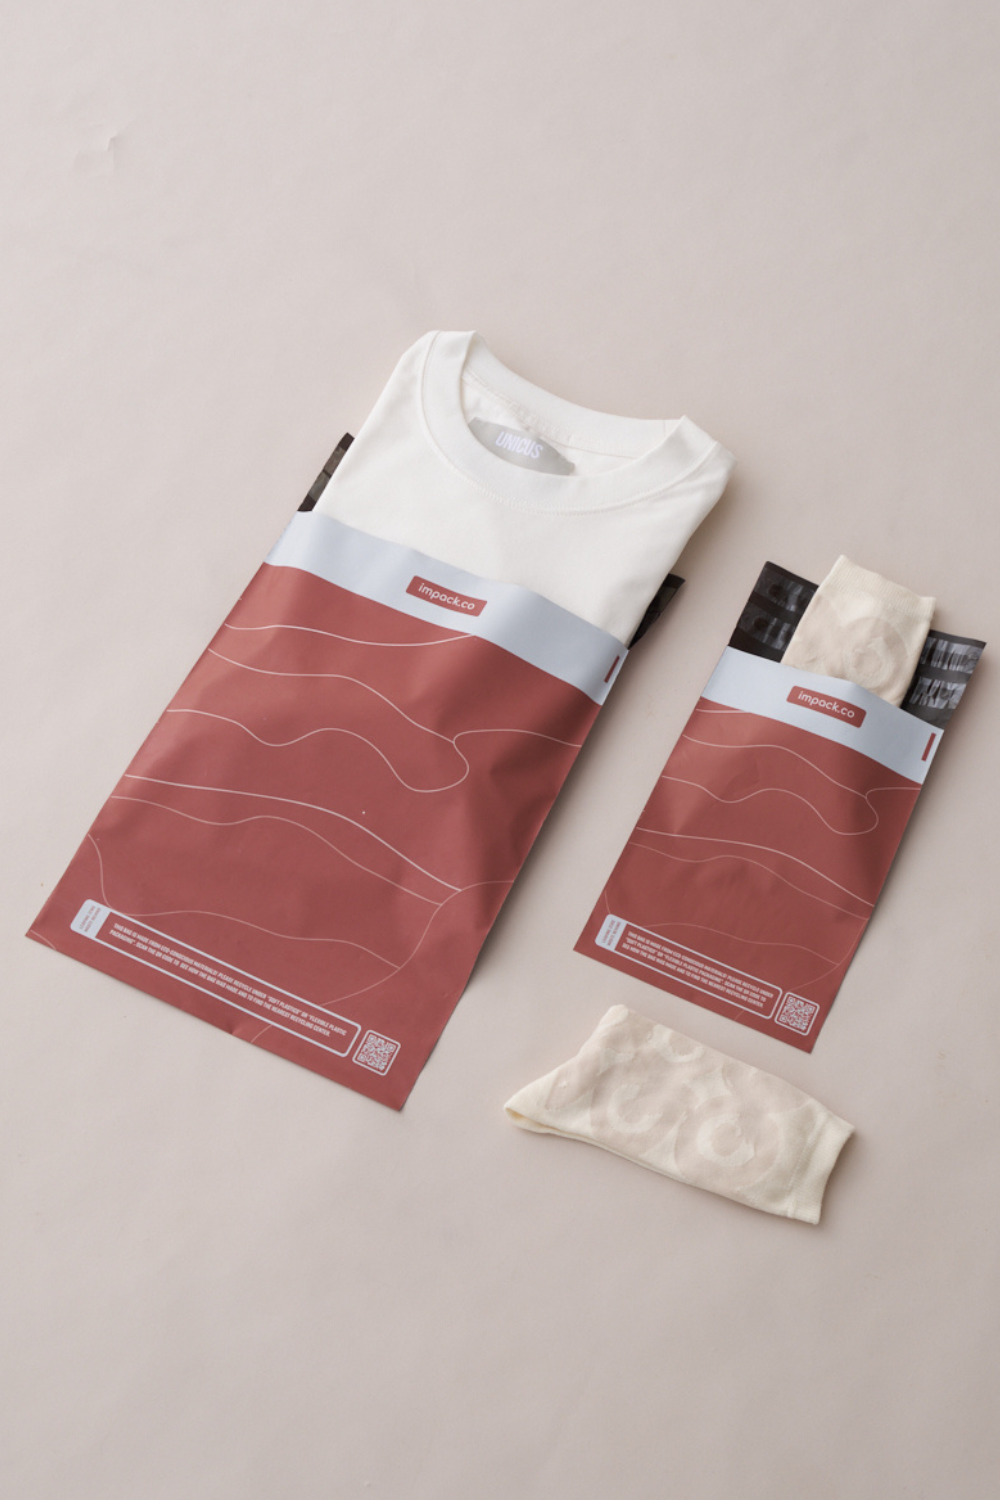 Folded white t-shirt in a brown paper bag, accompanied by a pair of beige socks beside their matching packaging, all placed on a light neutral surface—perfectly suited for medium-sized shipments using impack.co Tidal Terracotta Mailers 10" x 13".